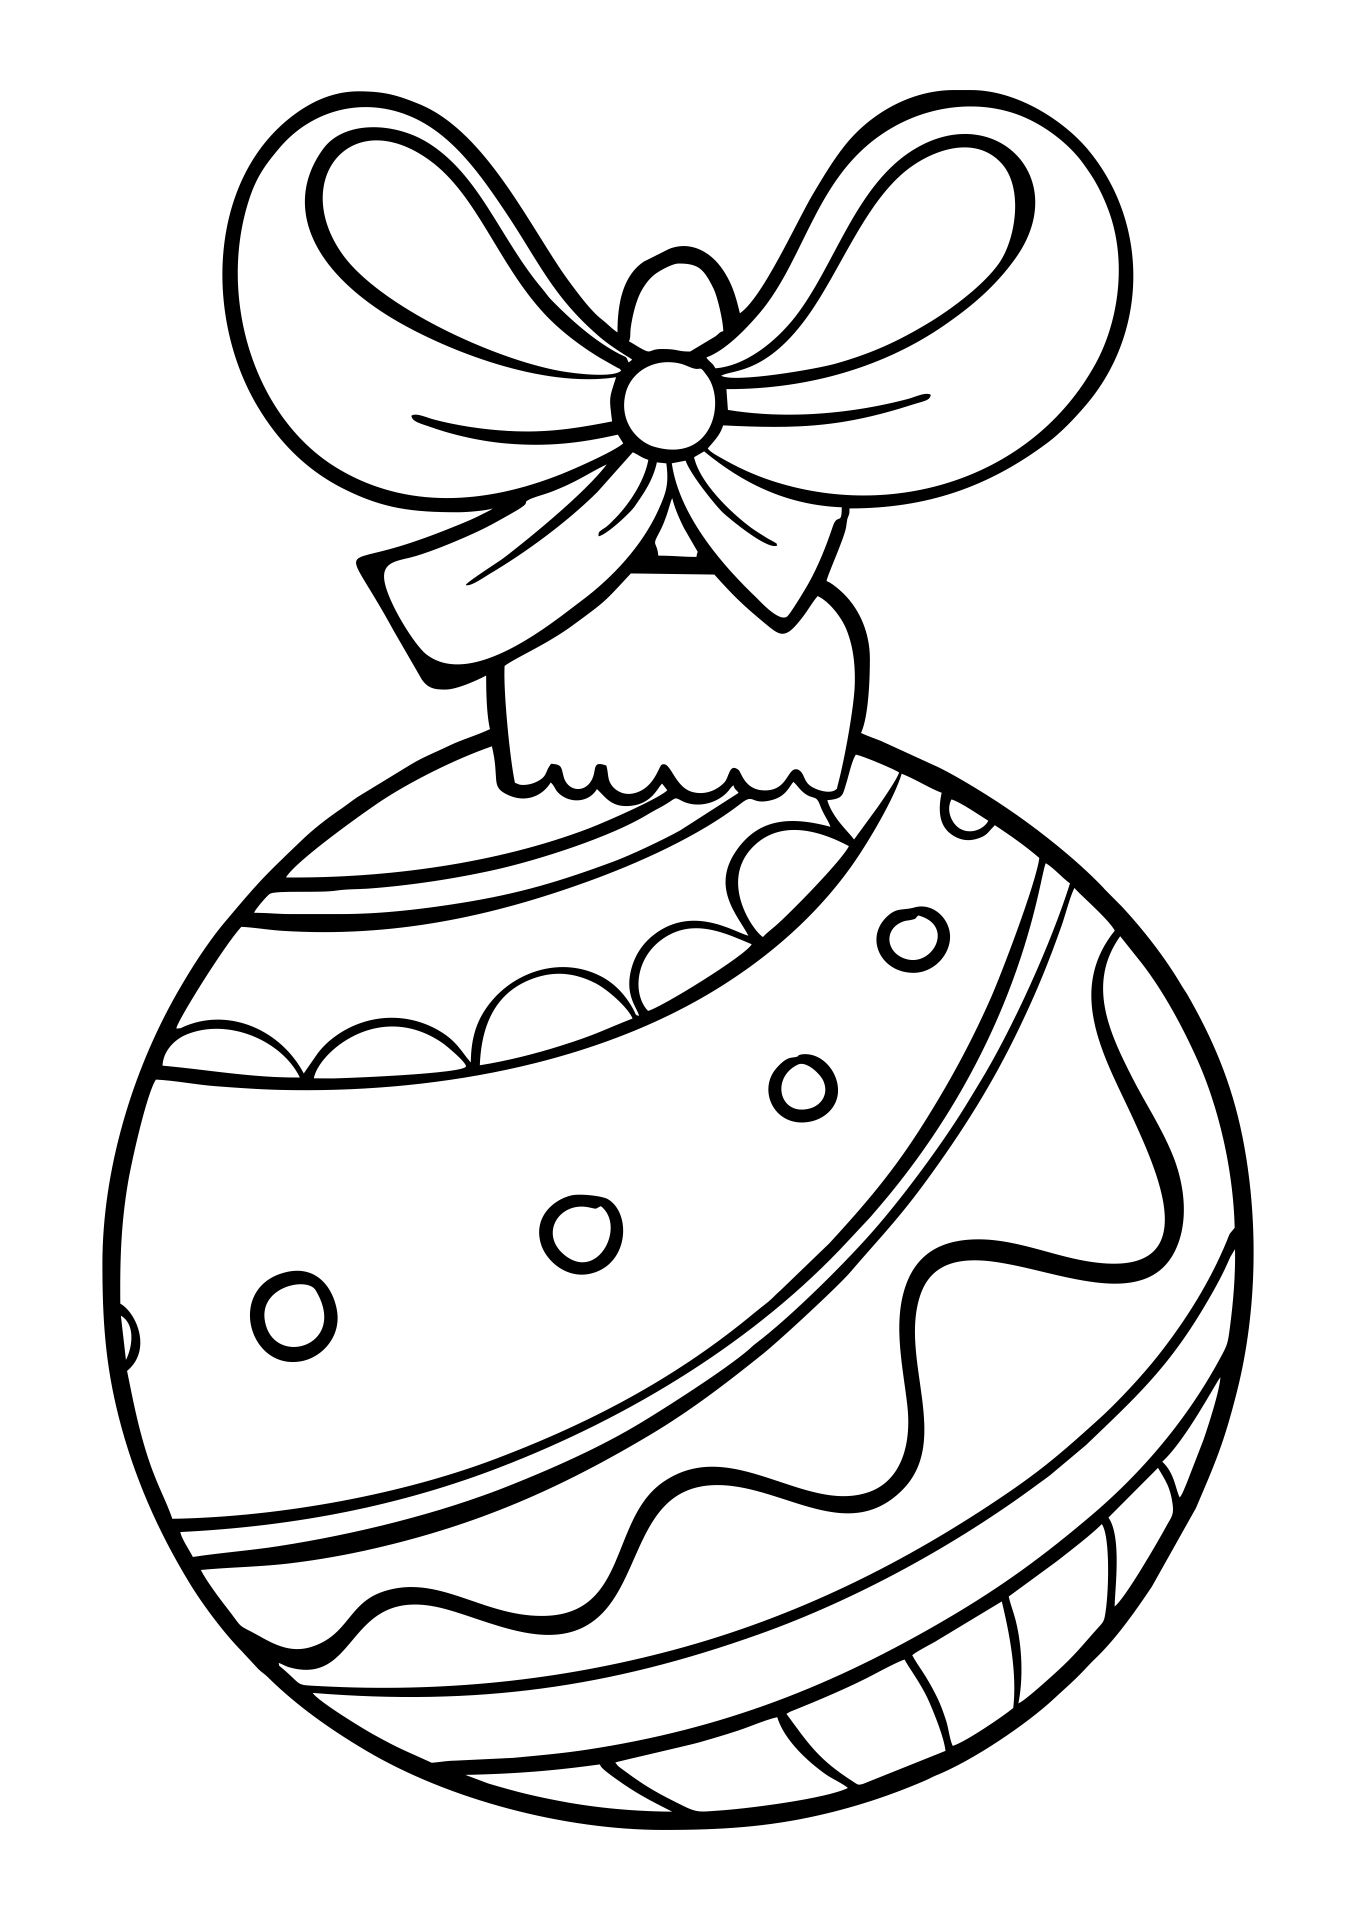 kaboose coloring pages for christmas ornaments - photo #24